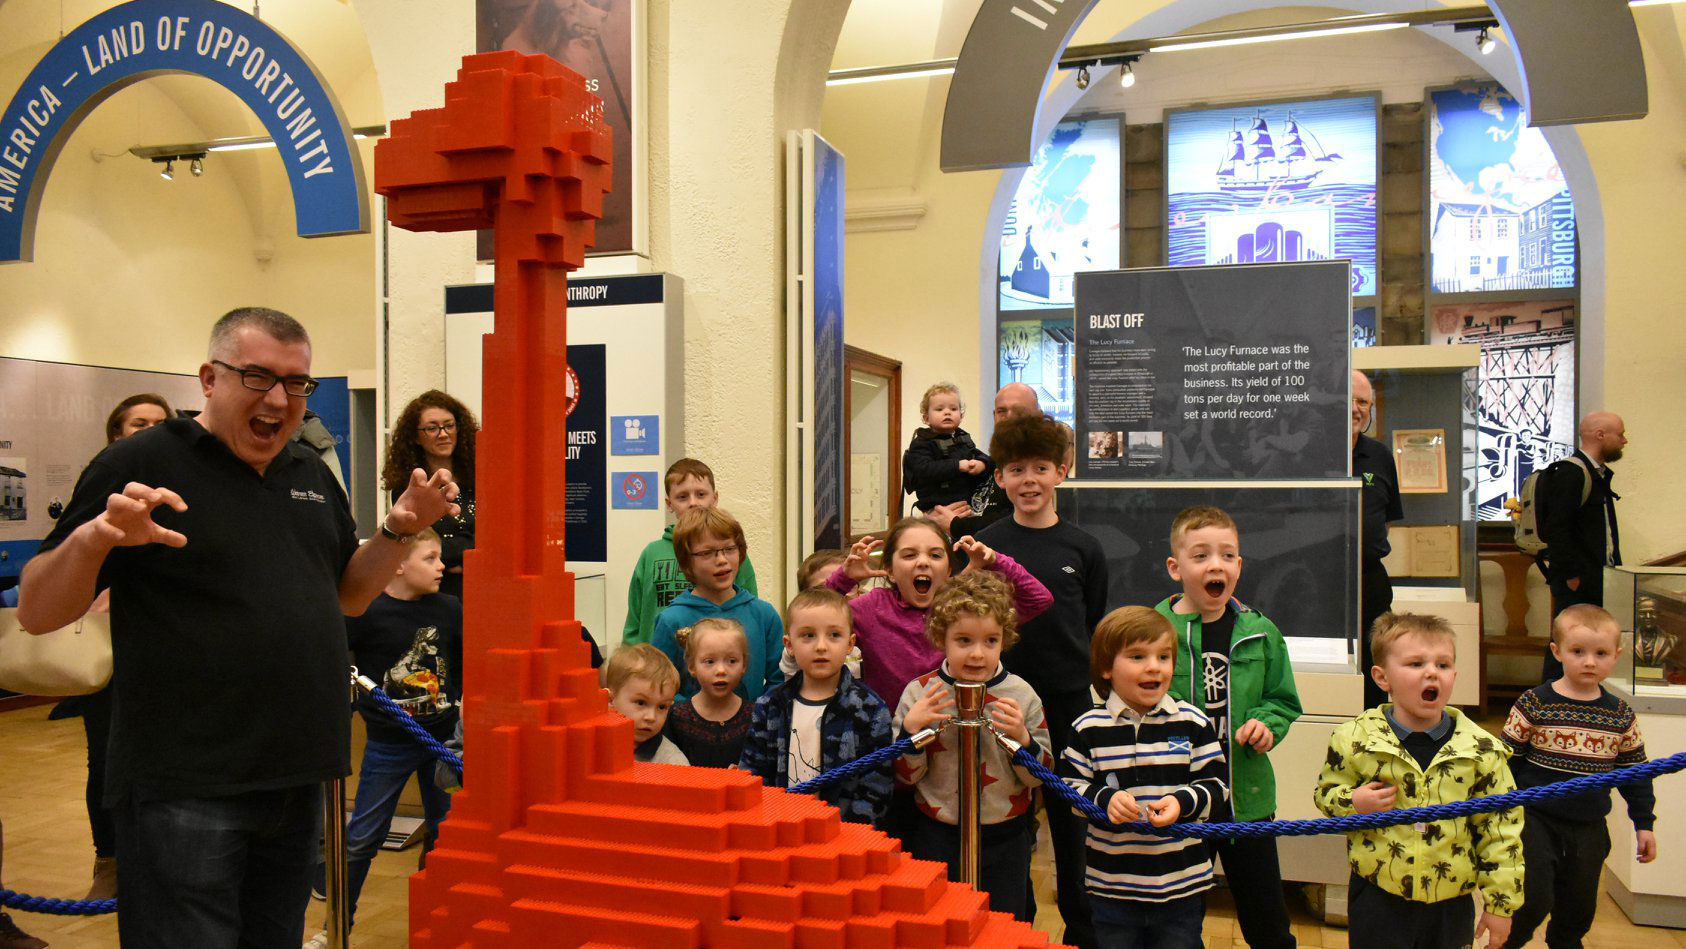 Scotland’s Dunfermline Learned About Dinosaurs, Engineering, and Collaboration When They Built a Dinosaur Made of 35,000 Lego Bricks